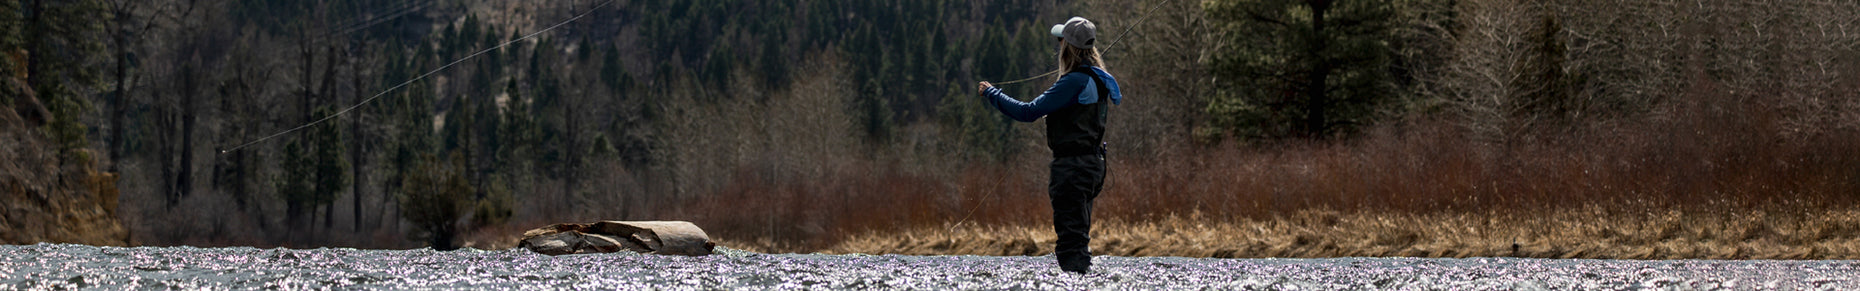 What to Wear Under Waders  Fly Fisherman